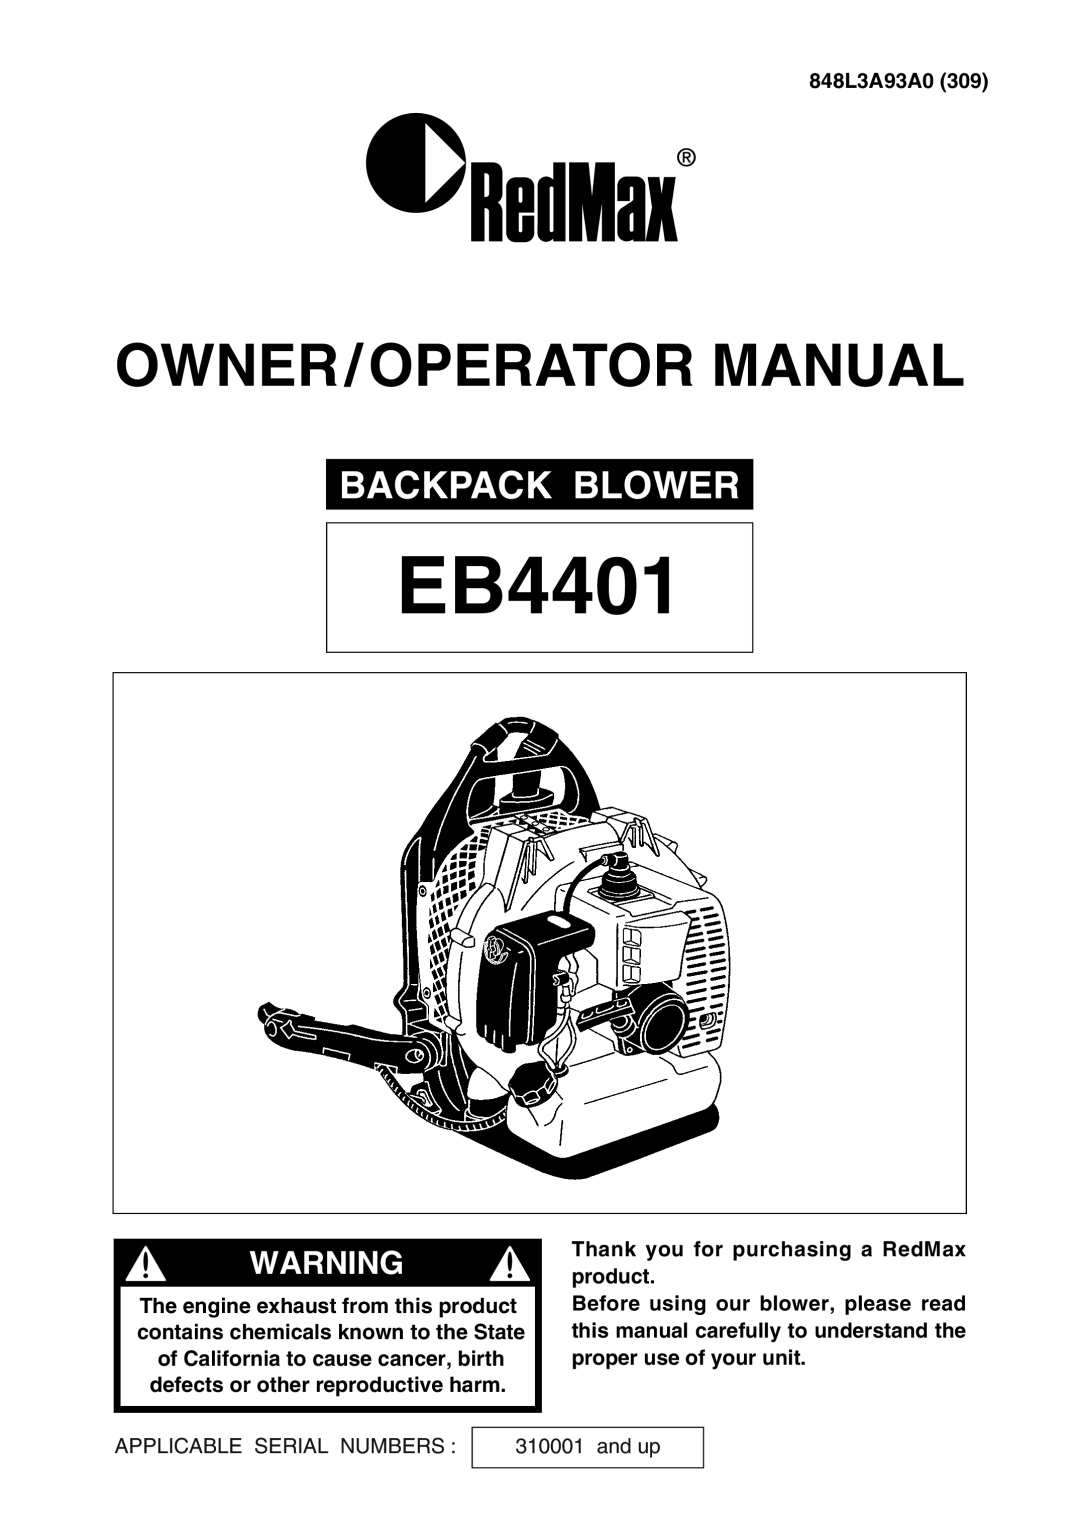 RedMax EB4401 manual Backpack Blower, Owner/Operator Manual, 848L3A93A0, Thank you for purchasing a RedMax product 